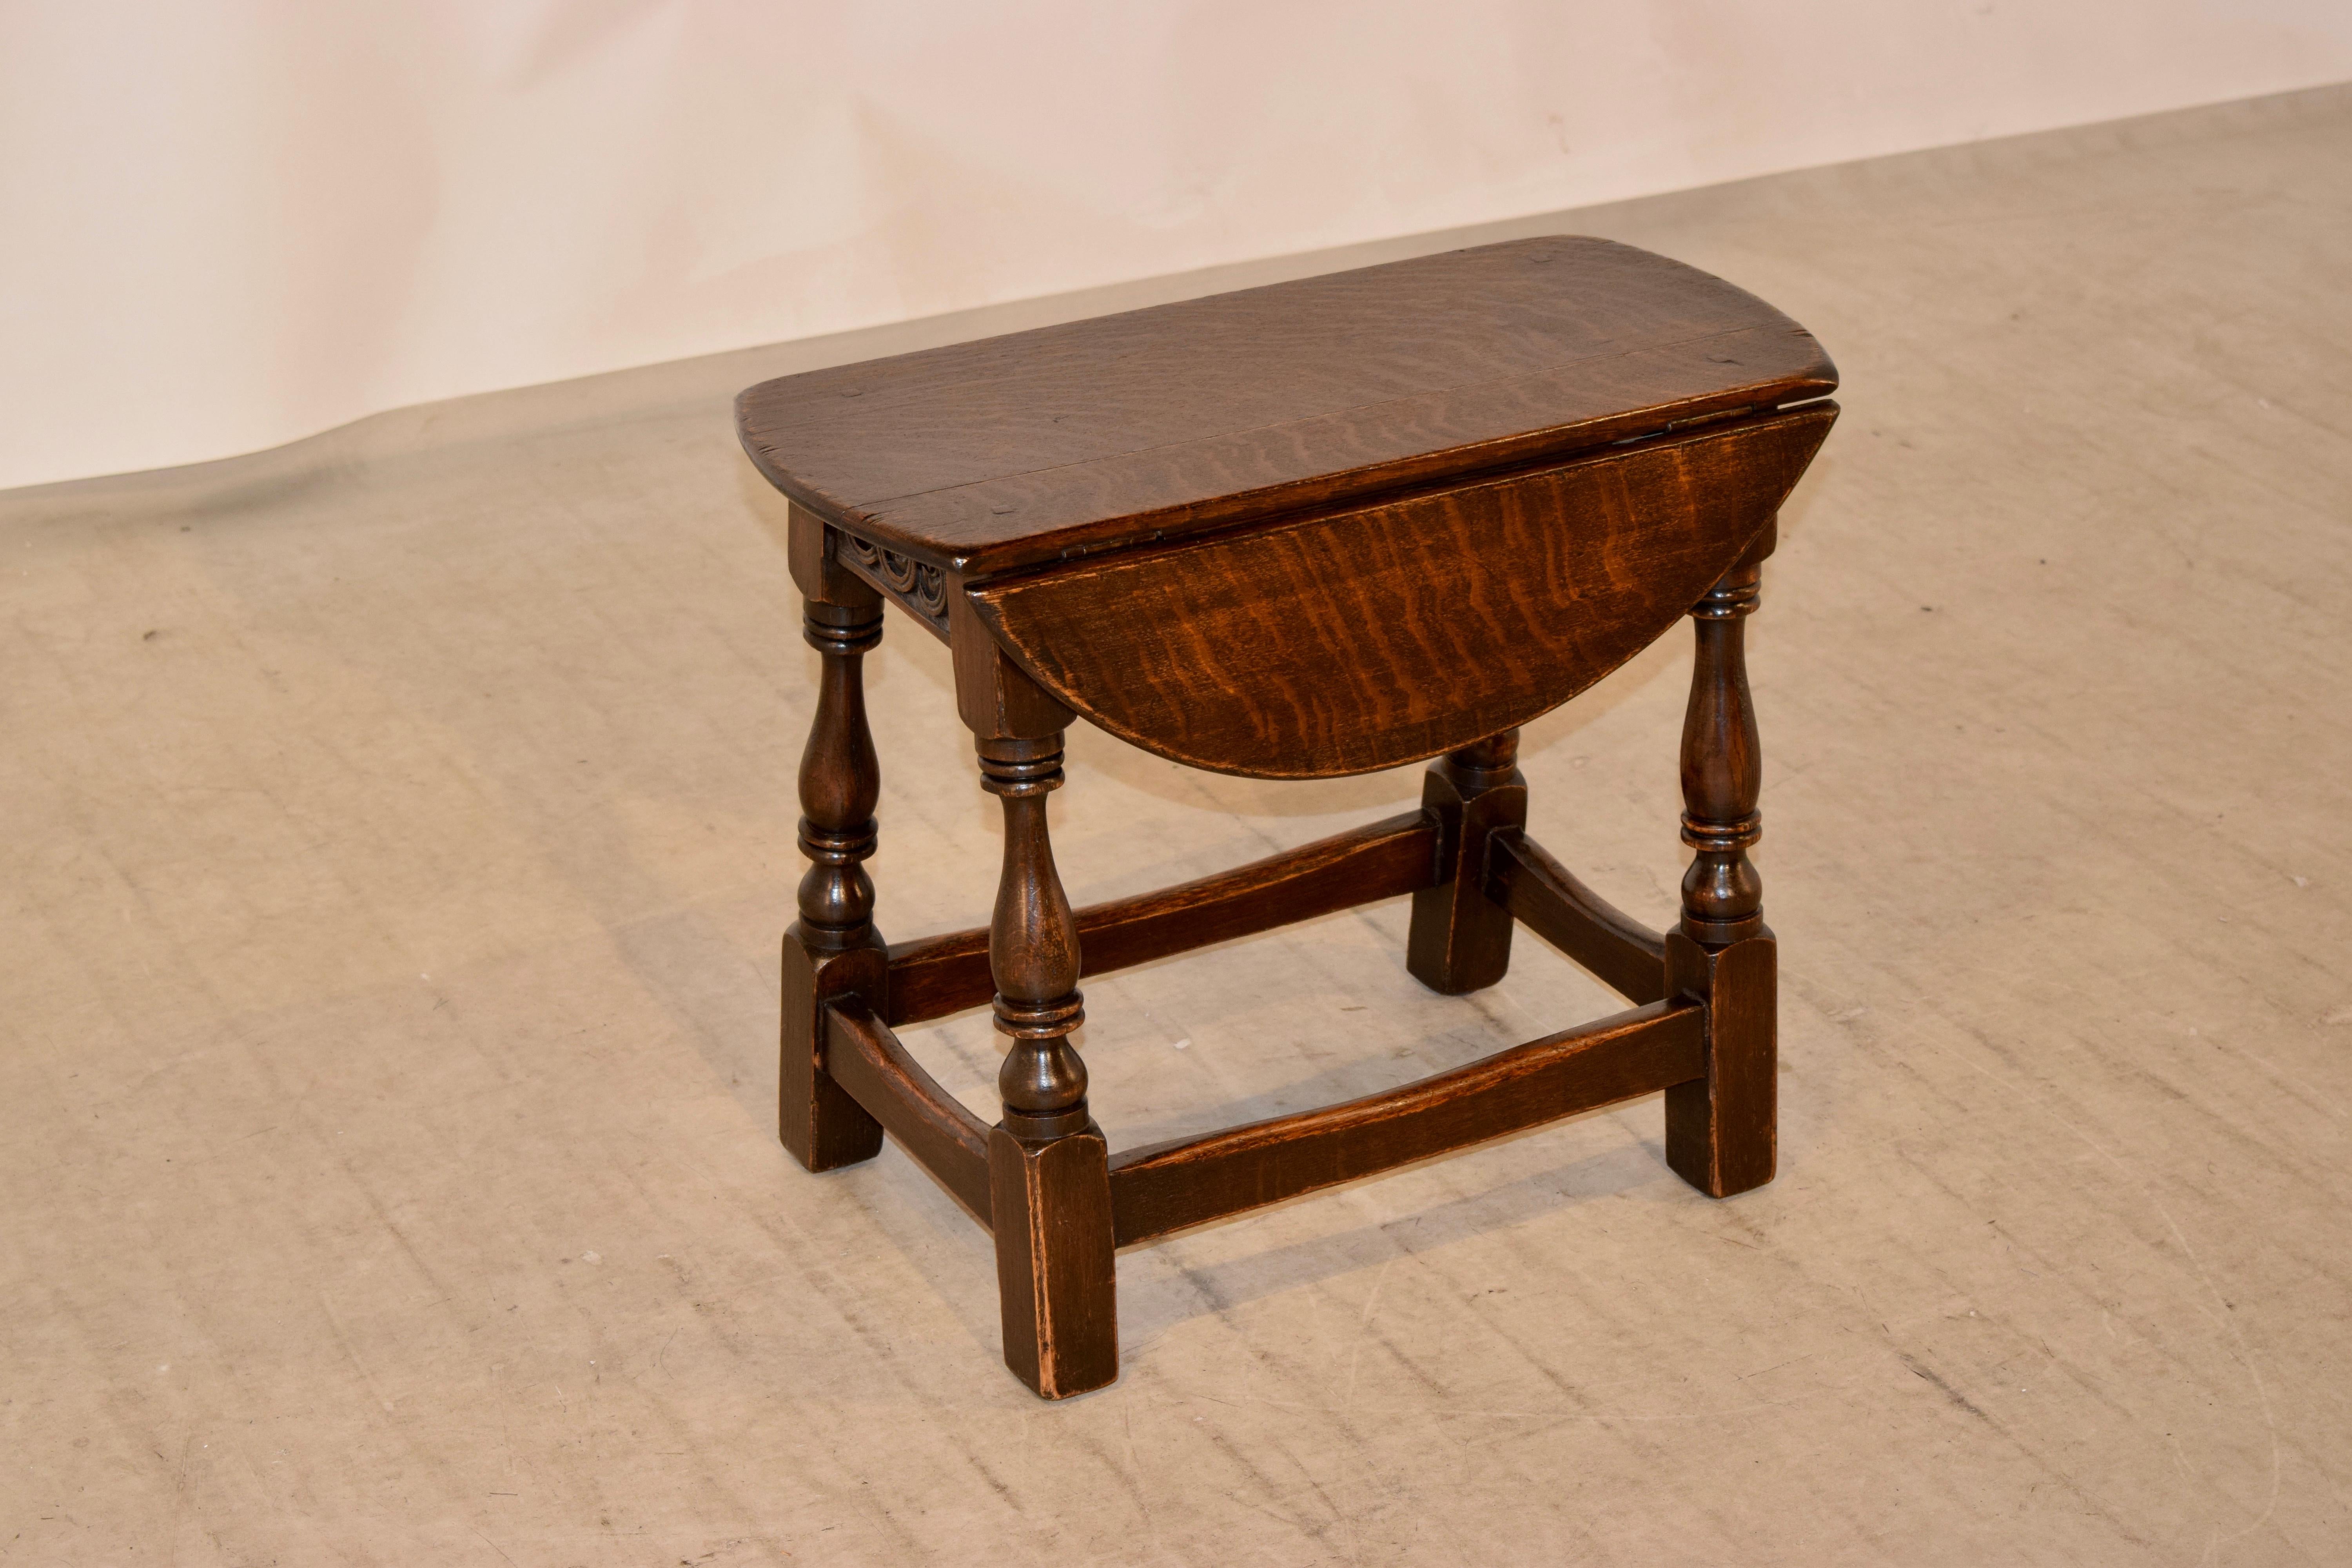 19th century small drop-leaf table from England with a wonderfully grained top and a simple apron with hand carved decoration on the ends, supported on splayed hand-turned legs joined by simple stretchers. The top when open measures 22 x 21.88.